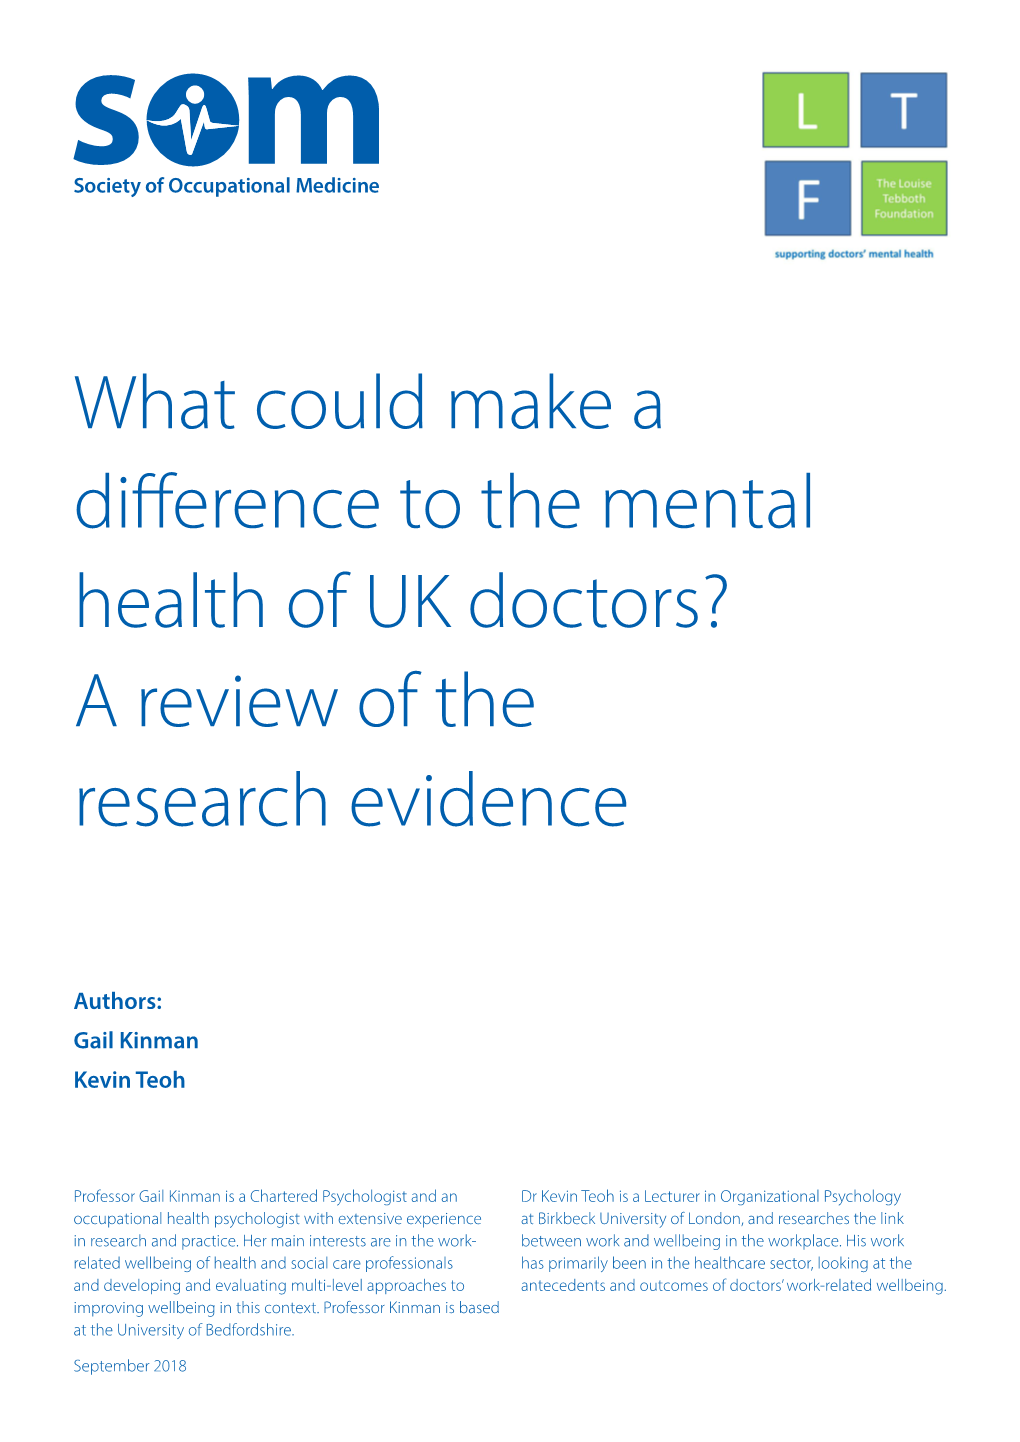 What Could Make a Difference to the Mental Health of UK Doctors? a Review of the Research Evidence